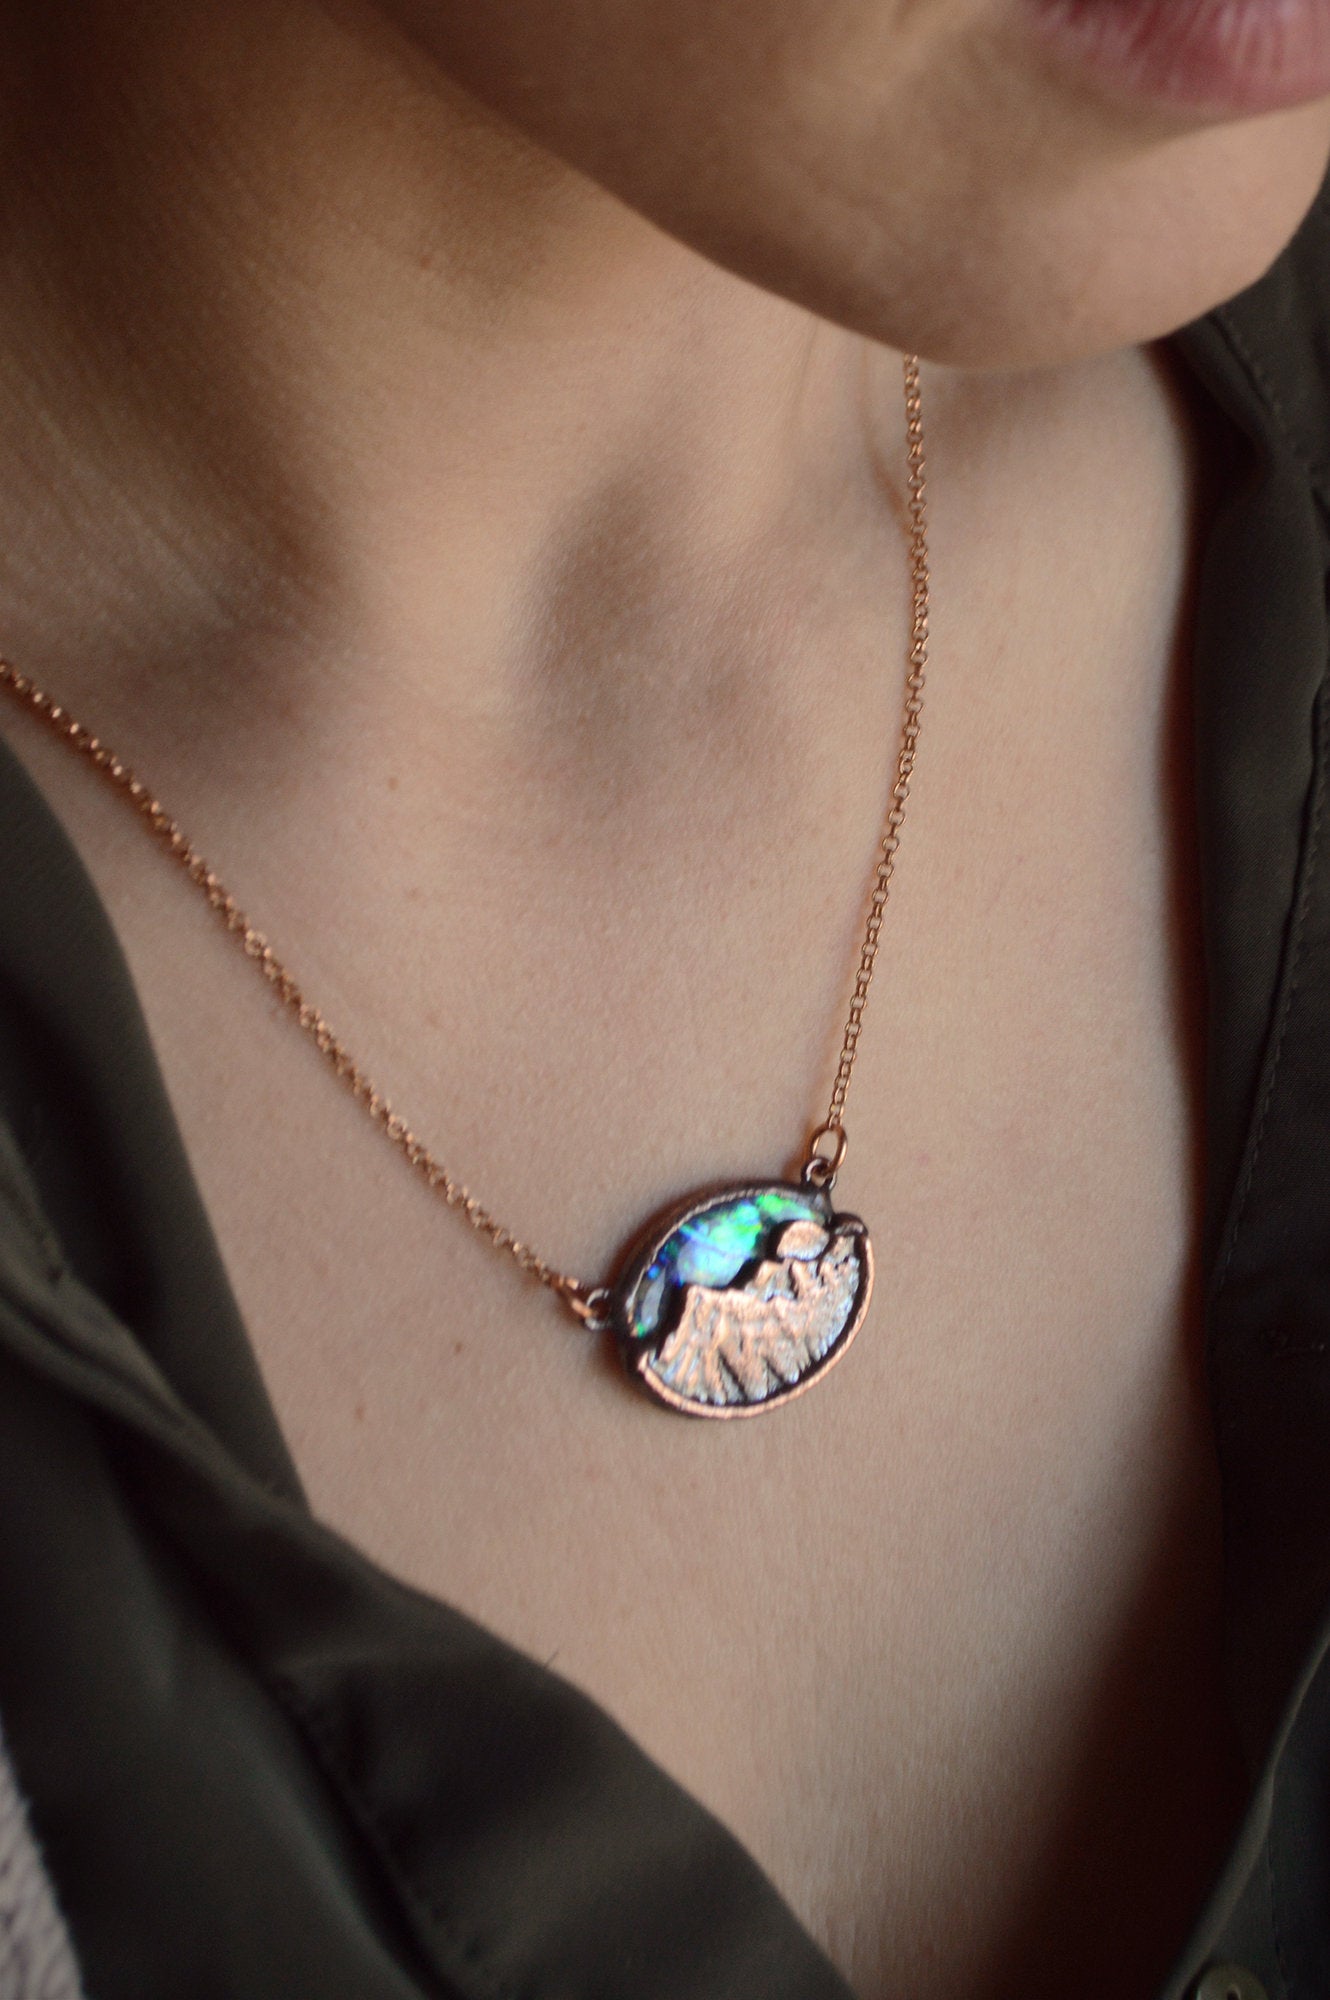 Northern lights copper necklace with abalone shell